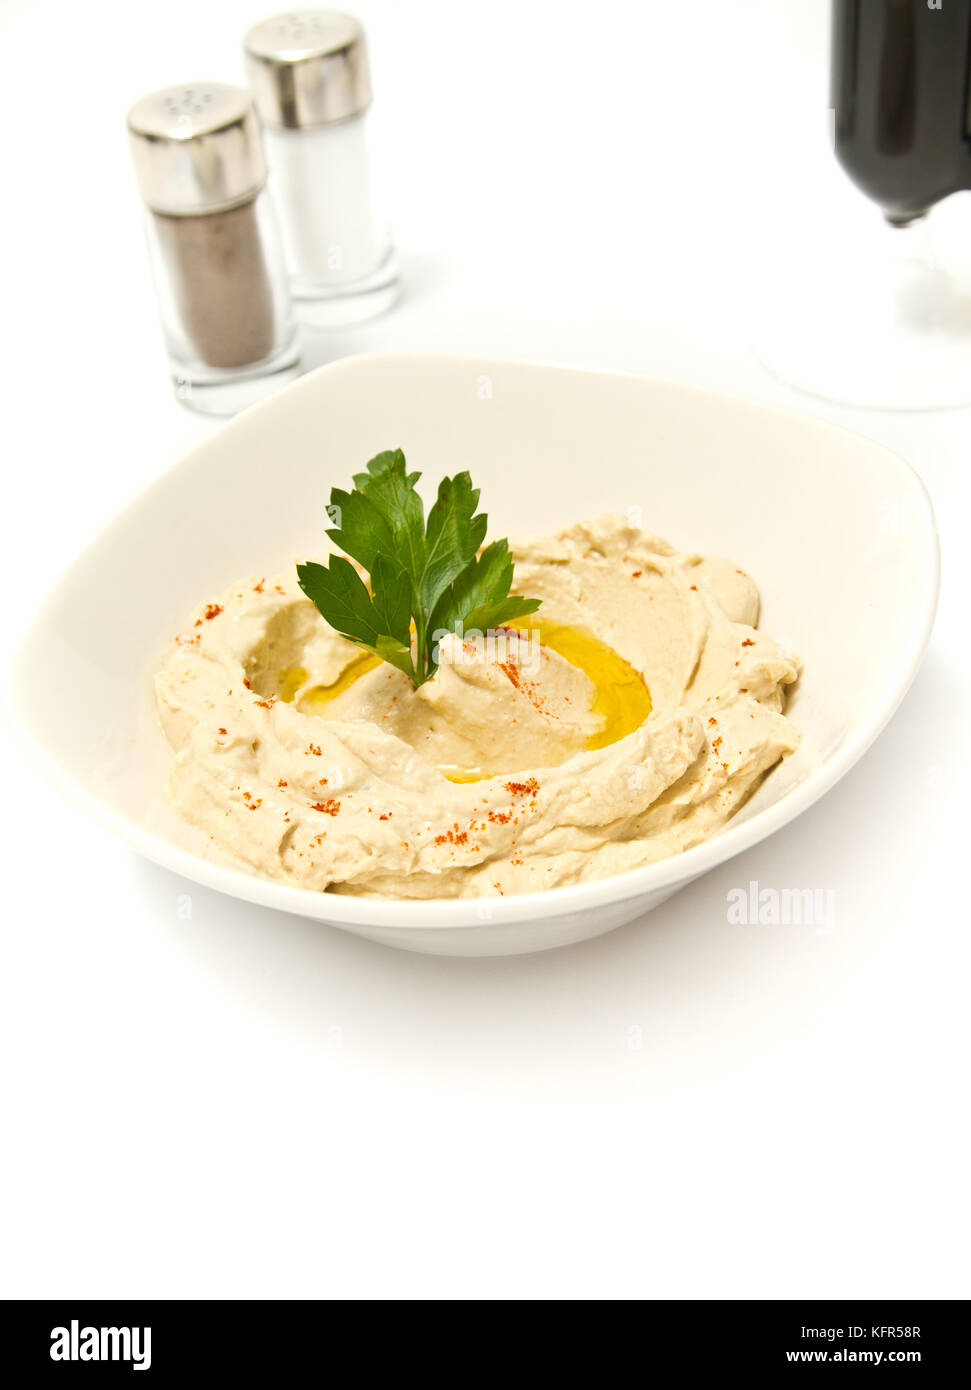 Bowl of hummus with parsely and olive oil Stock Photo